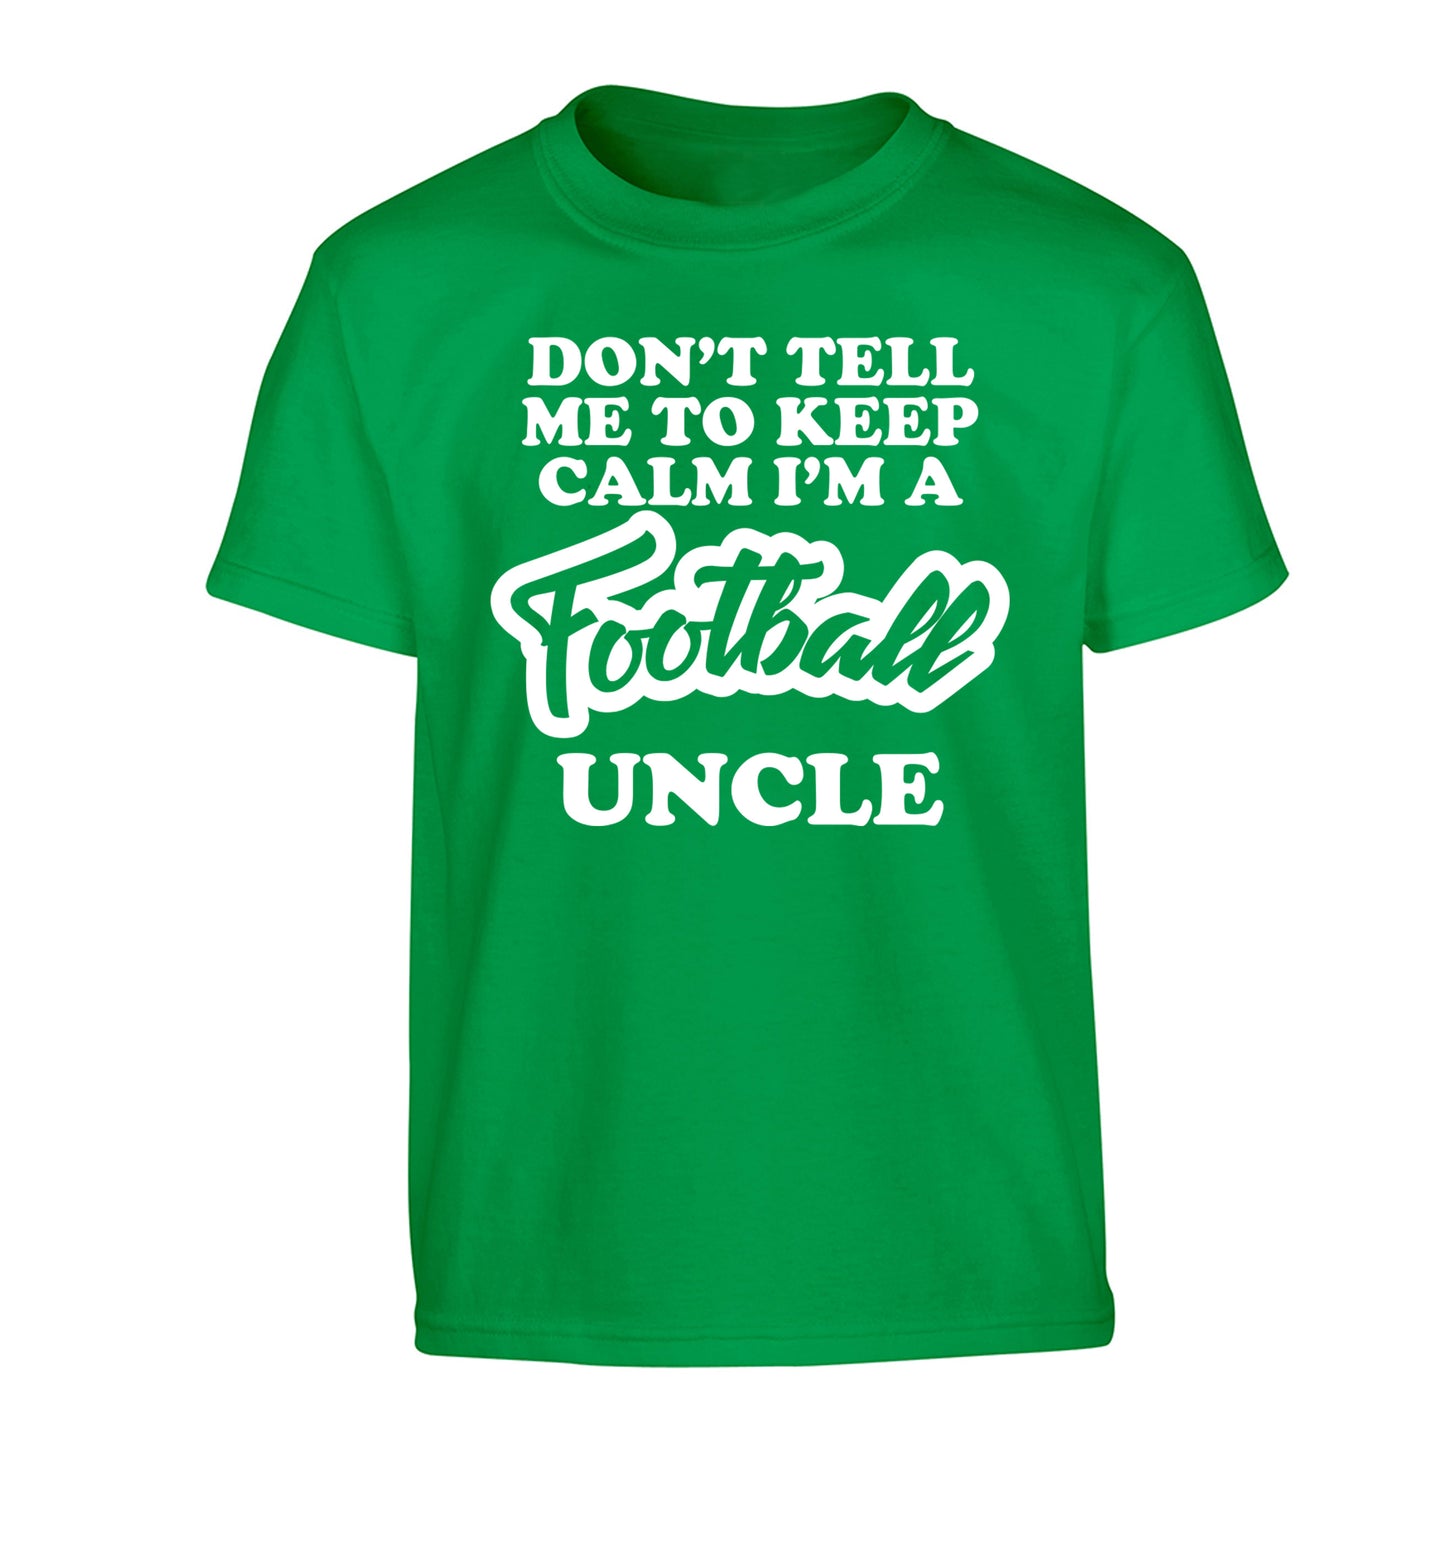 Don't tell me to keep calm I'm a football uncle Children's green Tshirt 12-14 Years